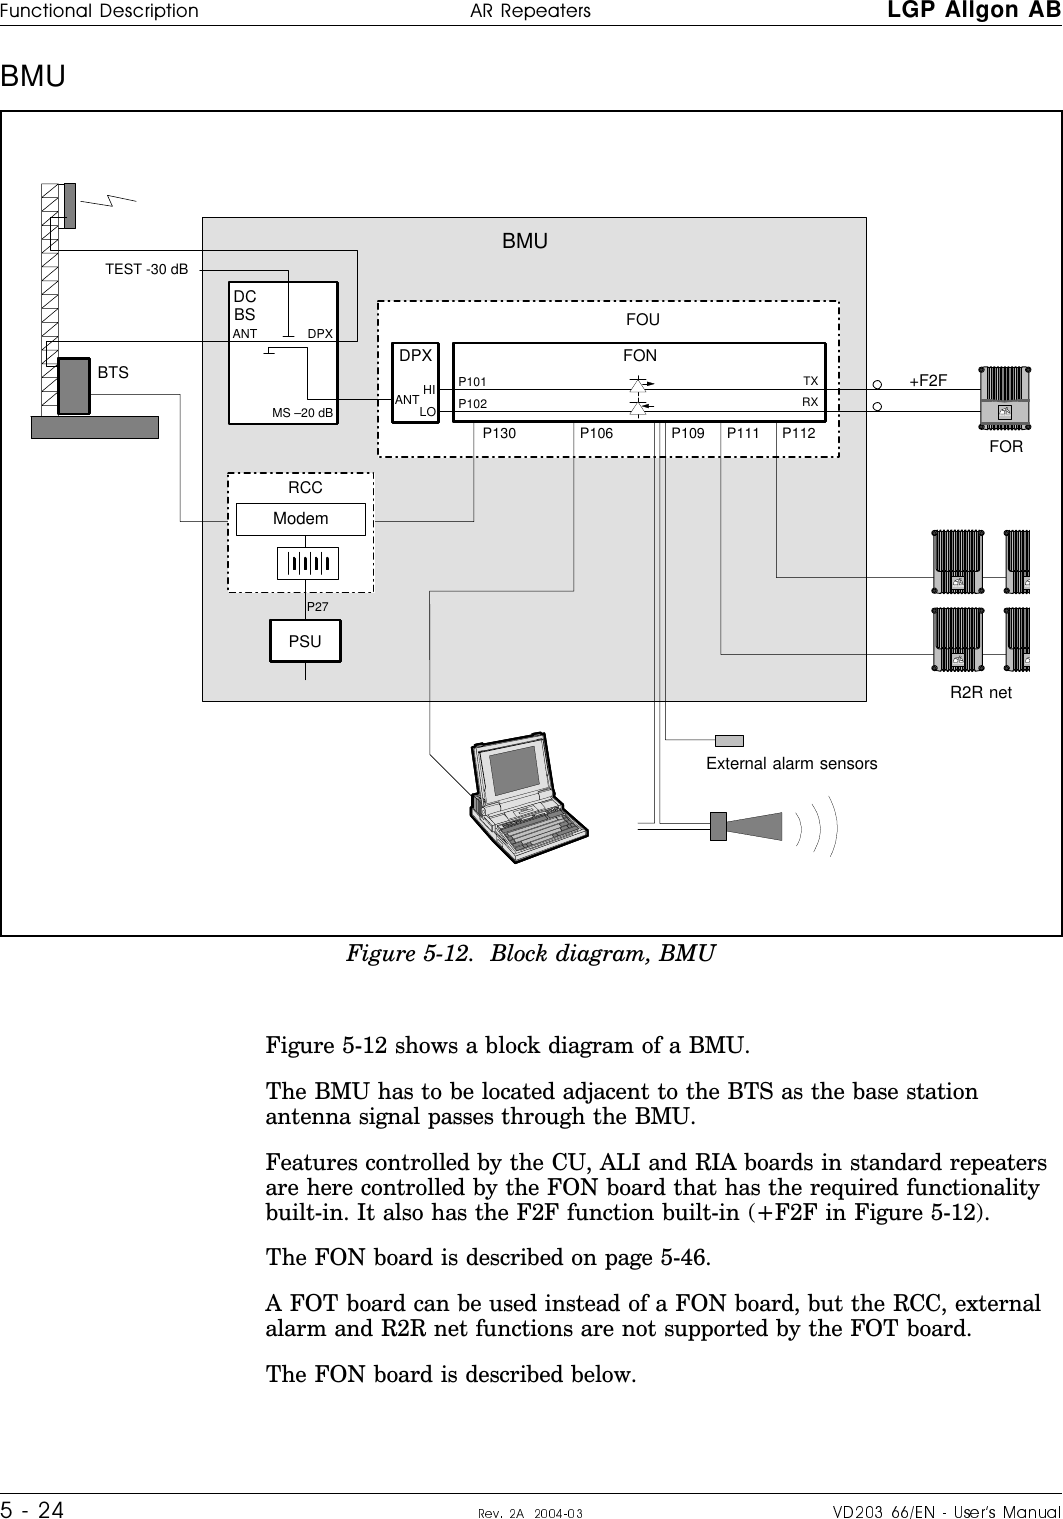 BMU Figure 5-12 shows a block diagram of a BMU.The BMU has to be located adjacent to the BTS as the base stationantenna signal passes through the BMU.Features controlled by the CU, ALI and RIA boards in standard repeatersare here controlled by the FON board that has the required functionalitybuilt-in. It also has the F2F function built-in (+F2F in Figure 5-12).The FON board is described on page 5-46.A FOT board can be used instead of a FON board, but the RCC, externalalarm and R2R net functions are not supported by the FOT board.The FON board is described below.DCBSTEST -30 dBMS –20 dBANT DPXFONTXRXDPXANT HILOFOUFORALLGONBTSP27RCCPSUP111ALLGONALLGONALLALLP112P130 P109P106P101P102+F2FBMUModemR2R netExternal alarm sensorsFigure 5-12.  Block diagram, BMU¦o6cro#fH6c|cro H|H#H LGP Allgon ABSa¤V